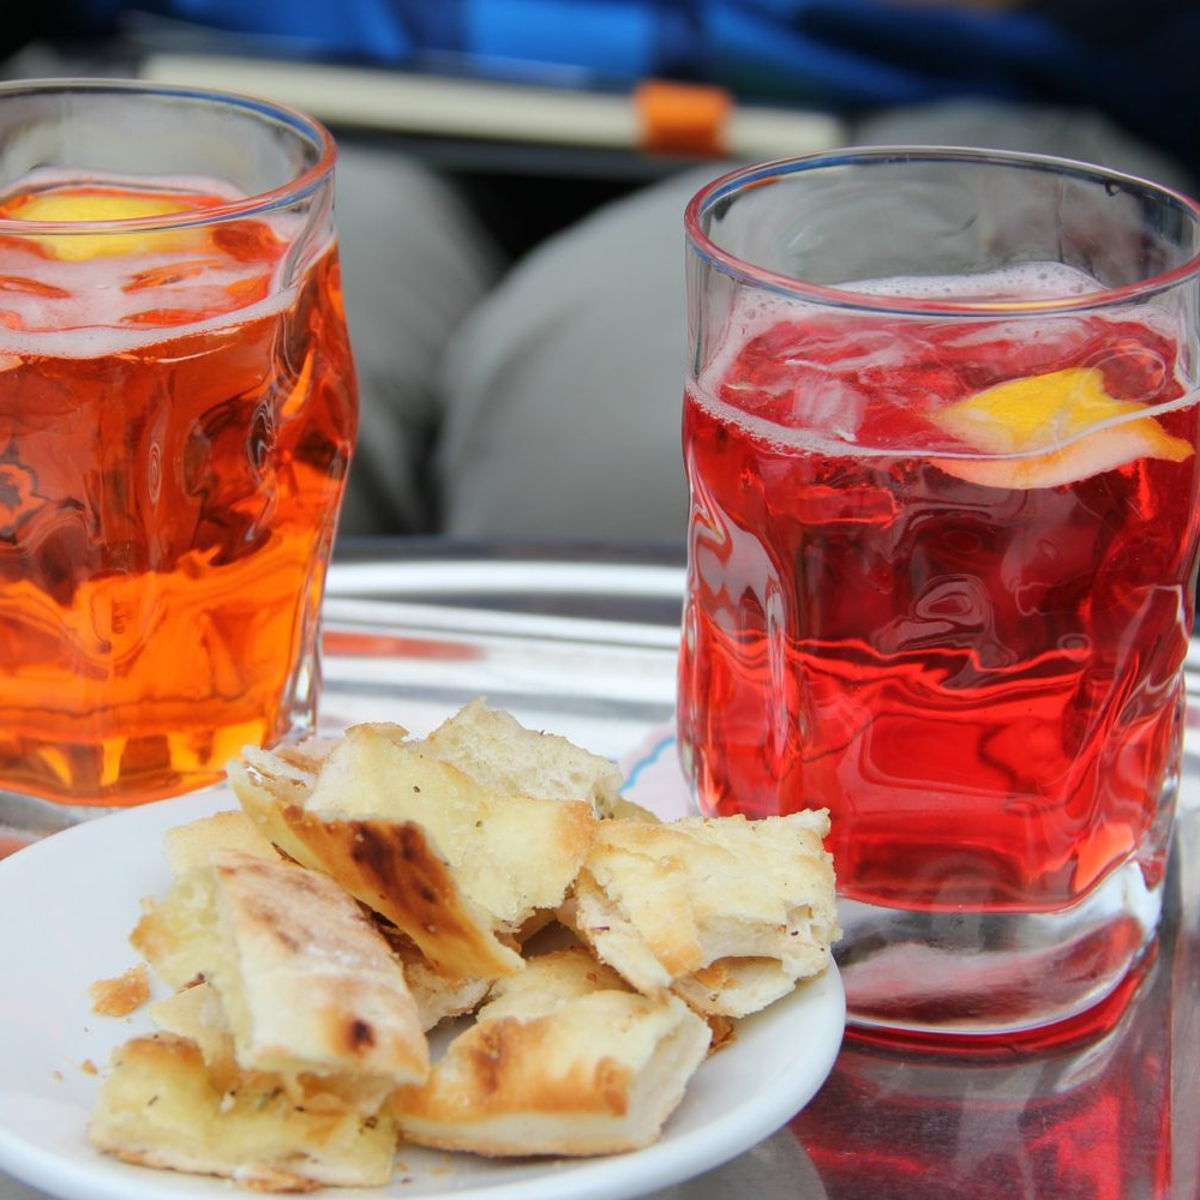 Spritz and food walk with tasting in Venice